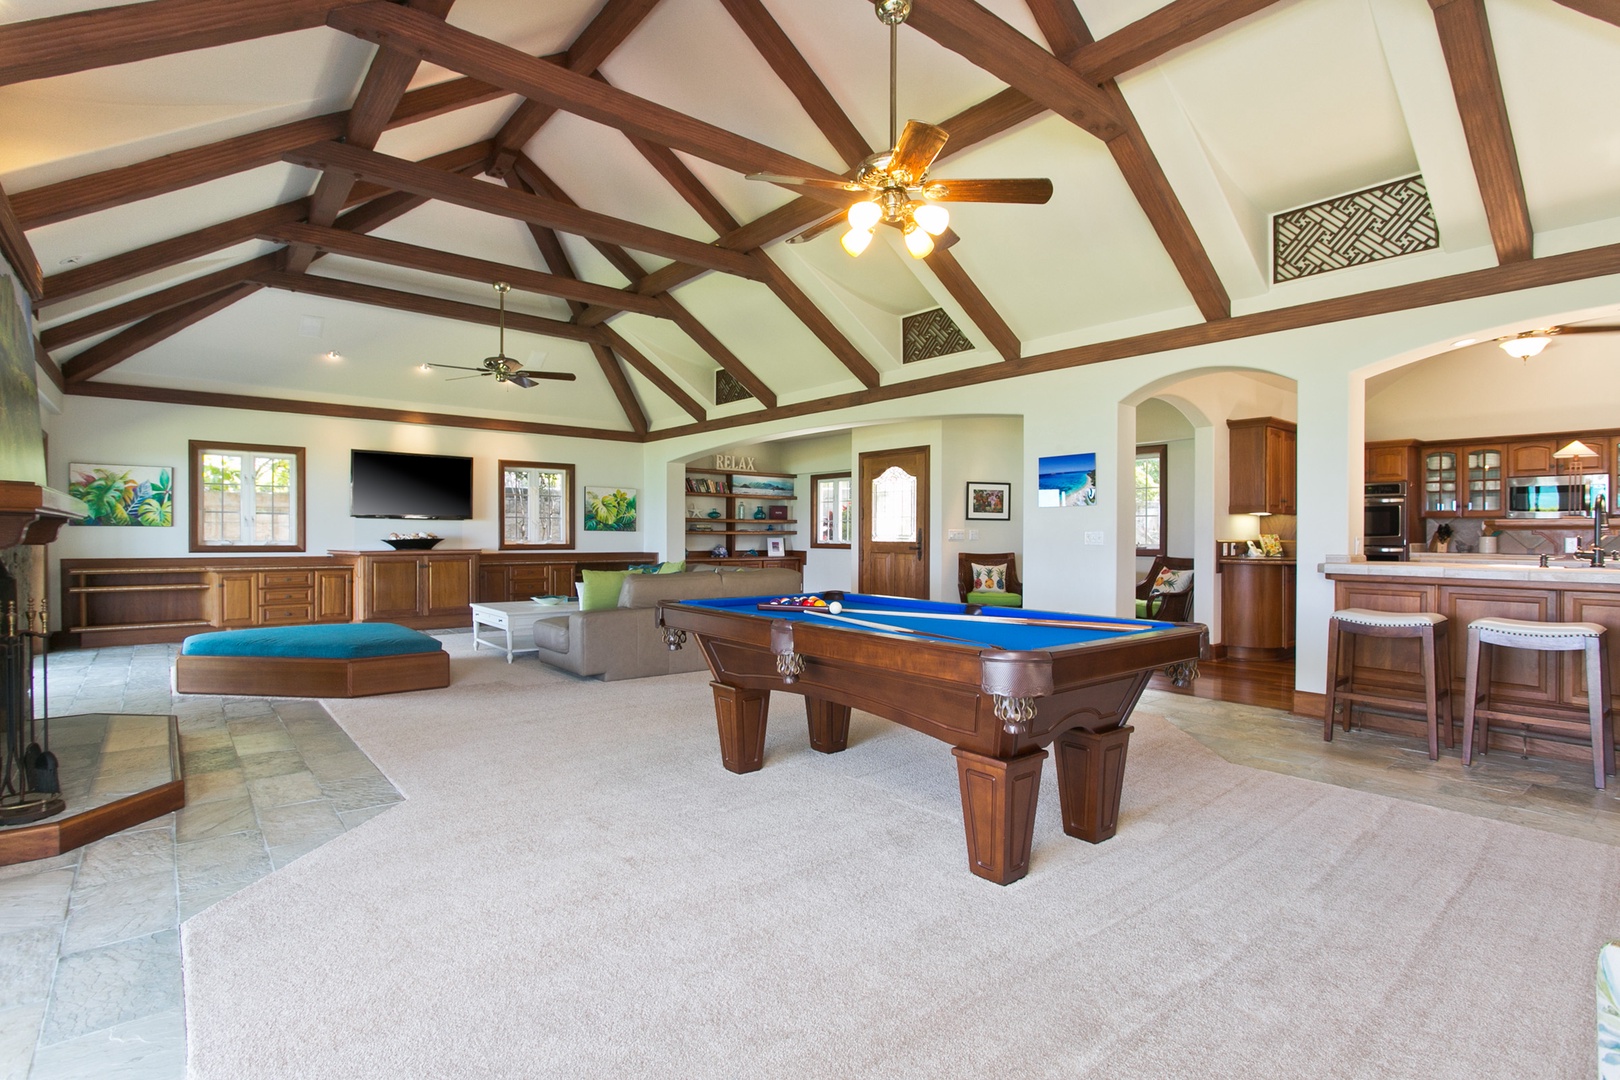 Kailua Vacation Rentals, Hale Melia* - Play, relax, and entertain in a spacious game room that opens up to the beauty of the beachfront.